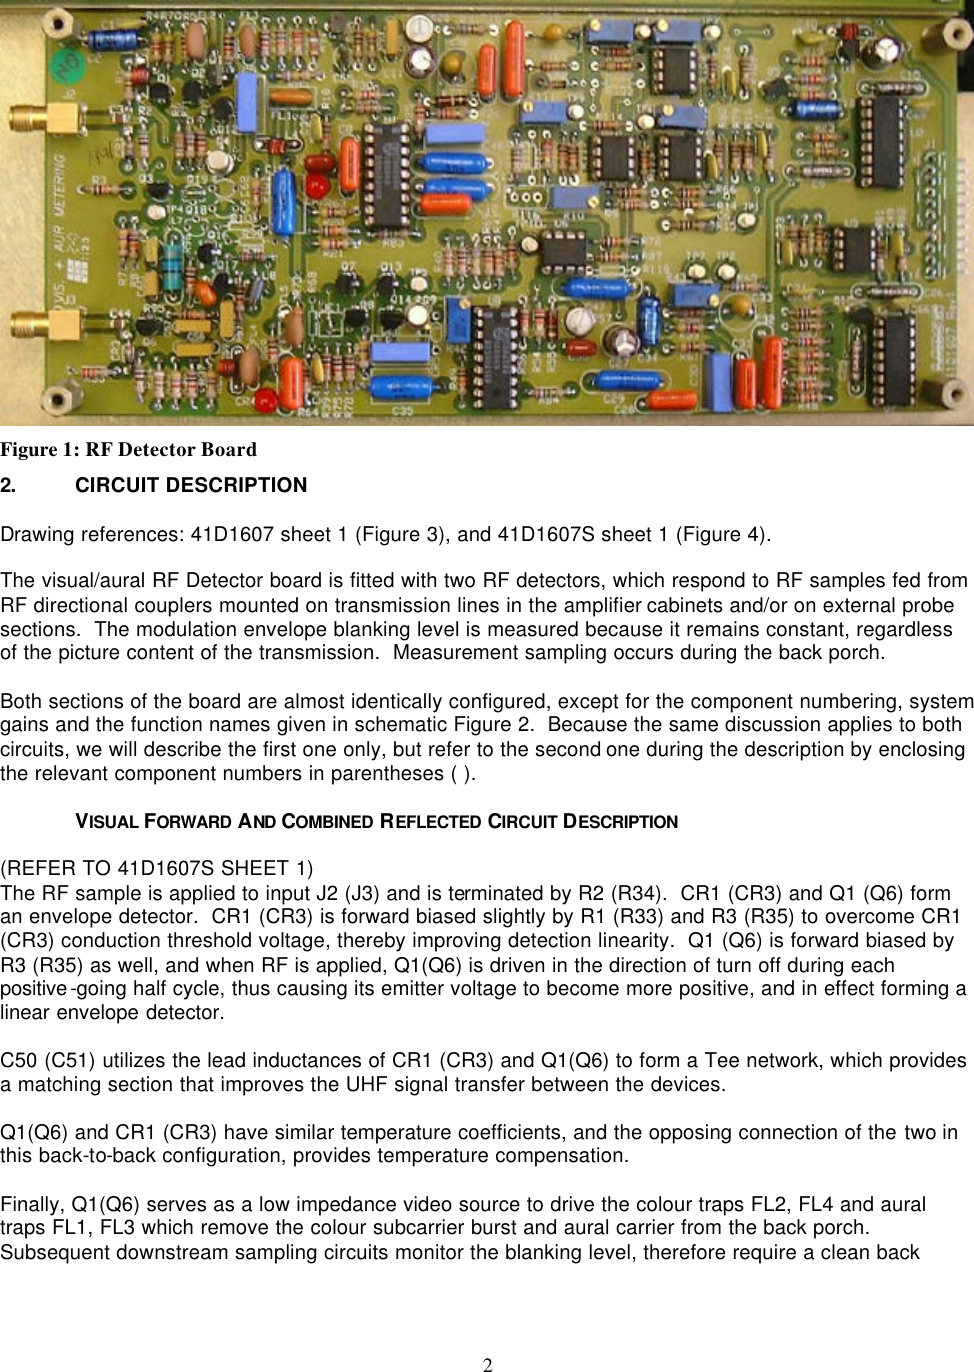    2  Figure 1: RF Detector Board 2. CIRCUIT DESCRIPTION  Drawing references: 41D1607 sheet 1 (Figure 3), and 41D1607S sheet 1 (Figure 4).  The visual/aural RF Detector board is fitted with two RF detectors, which respond to RF samples fed from RF directional couplers mounted on transmission lines in the amplifier cabinets and/or on external probe sections.  The modulation envelope blanking level is measured because it remains constant, regardless of the picture content of the transmission.  Measurement sampling occurs during the back porch.  Both sections of the board are almost identically configured, except for the component numbering, system gains and the function names given in schematic Figure 2.  Because the same discussion applies to both circuits, we will describe the first one only, but refer to the second one during the description by enclosing the relevant component numbers in parentheses ( ).  VISUAL FORWARD  AND  COMBINED  REFLECTED  CIRCUIT DESCRIPTION  (REFER TO 41D1607S SHEET 1) The RF sample is applied to input J2 (J3) and is terminated by R2 (R34).  CR1 (CR3) and Q1 (Q6) form an envelope detector.  CR1 (CR3) is forward biased slightly by R1 (R33) and R3 (R35) to overcome CR1 (CR3) conduction threshold voltage, thereby improving detection linearity.  Q1 (Q6) is forward biased by R3 (R35) as well, and when RF is applied, Q1(Q6) is driven in the direction of turn off during each positive-going half cycle, thus causing its emitter voltage to become more positive, and in effect forming a linear envelope detector.  C50 (C51) utilizes the lead inductances of CR1 (CR3) and Q1(Q6) to form a Tee network, which provides a matching section that improves the UHF signal transfer between the devices.  Q1(Q6) and CR1 (CR3) have similar temperature coefficients, and the opposing connection of the two in this back-to-back configuration, provides temperature compensation.  Finally, Q1(Q6) serves as a low impedance video source to drive the colour traps FL2, FL4 and aural traps FL1, FL3 which remove the colour subcarrier burst and aural carrier from the back porch.  Subsequent downstream sampling circuits monitor the blanking level, therefore require a clean back 